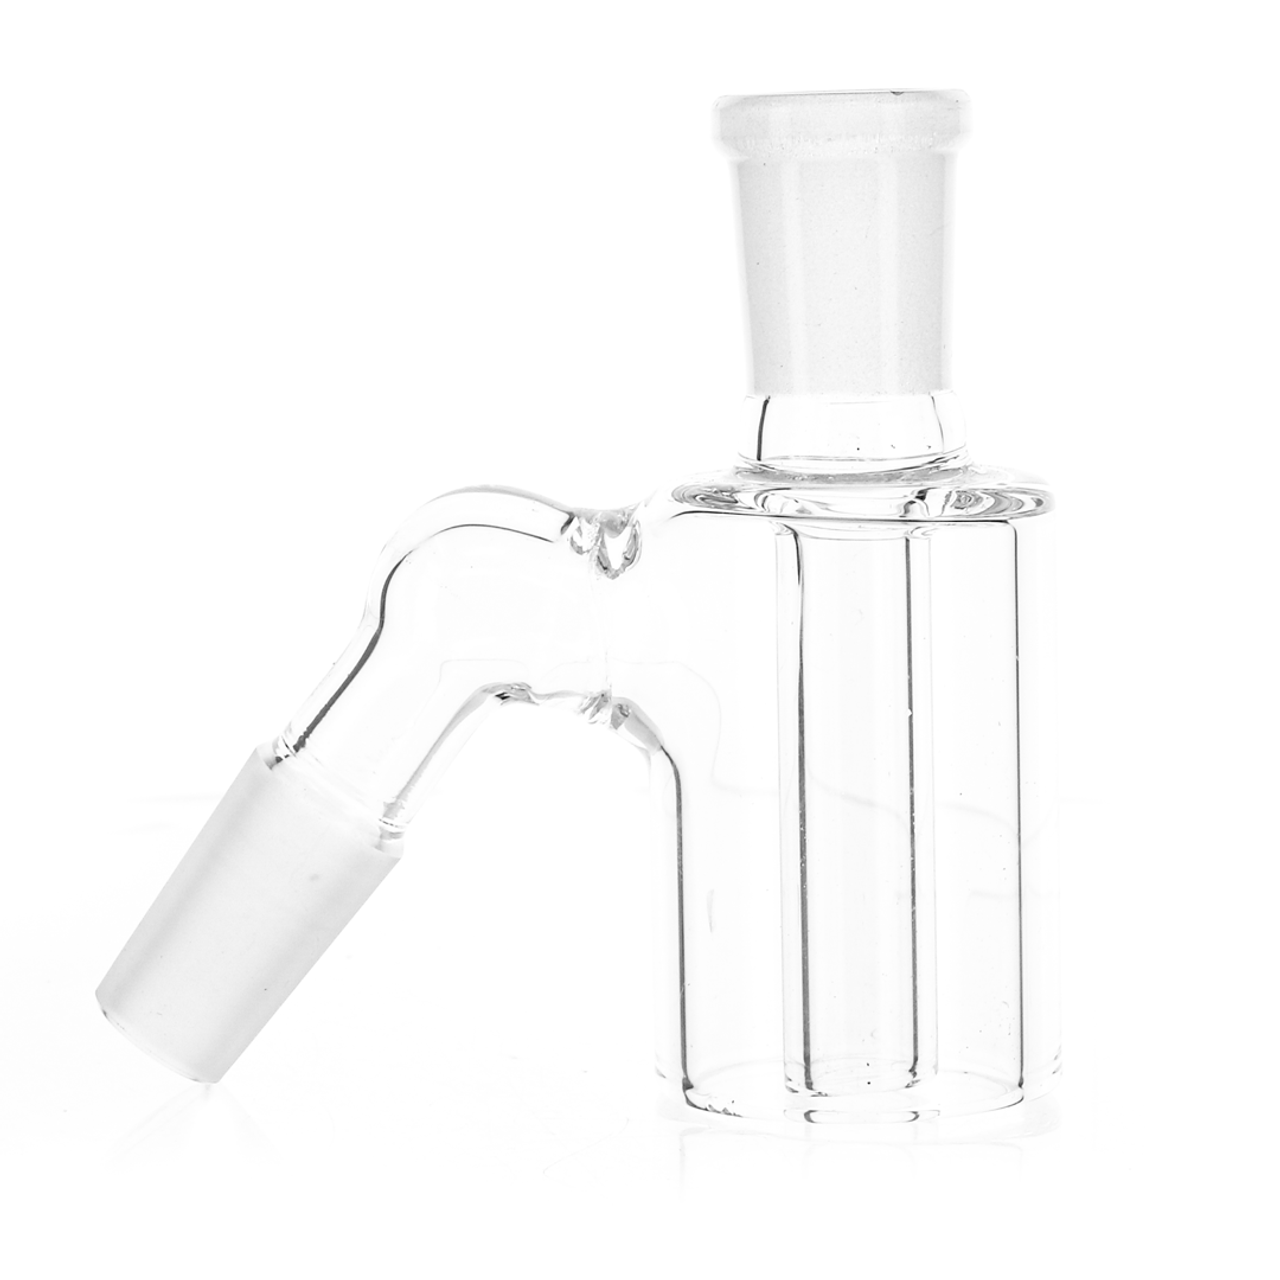 14mm Male 45 degree Reclaim Catcher Banger with Silicone Jar Set